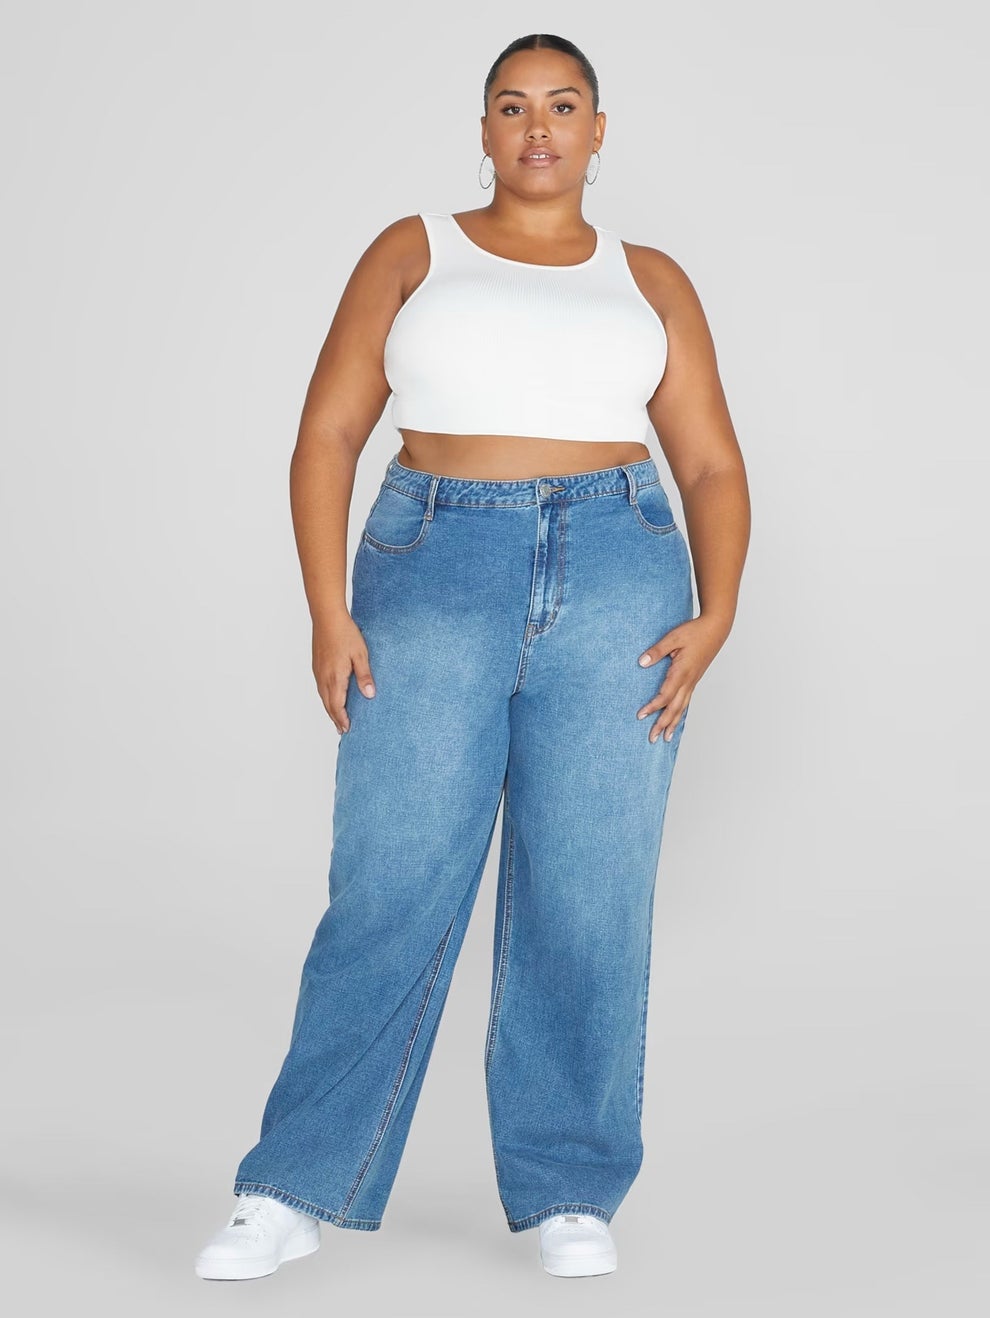 20 Best Places To Buy Trendy Plus-Size Clothing 2023